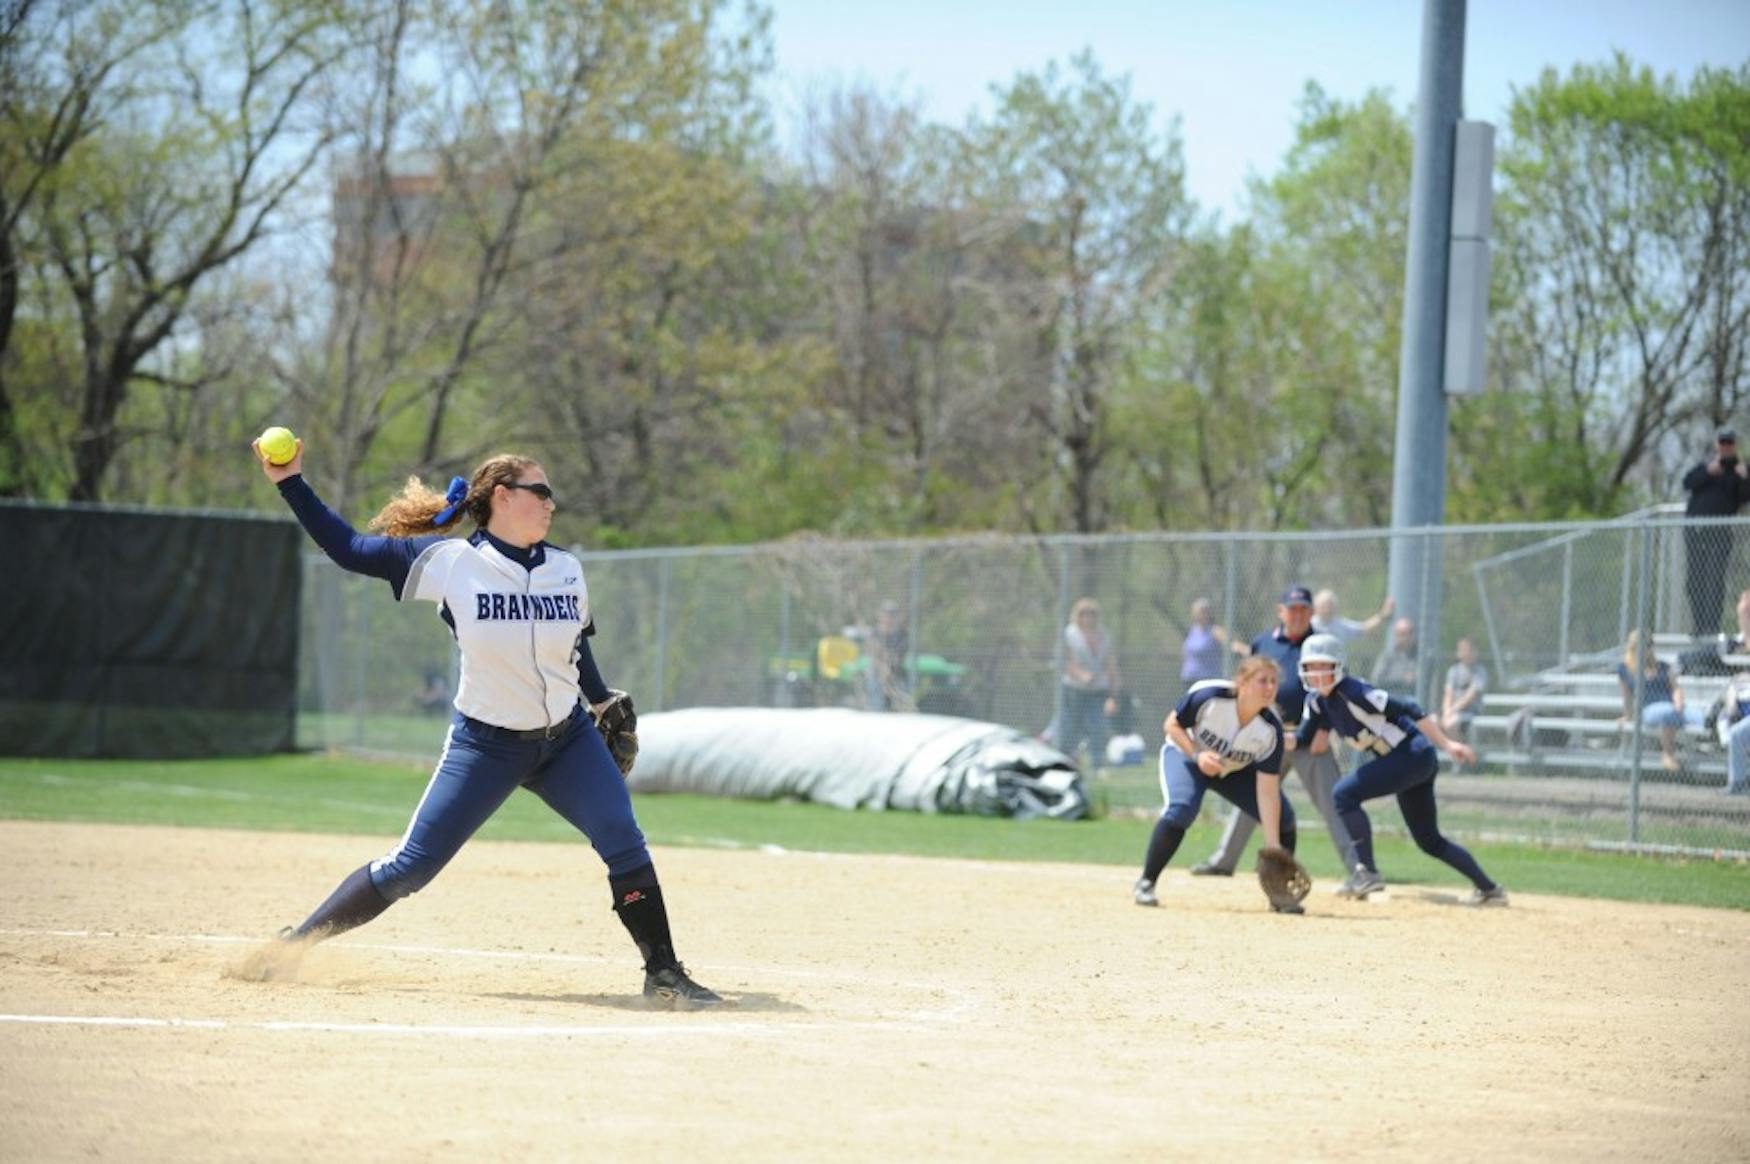 REACHING BACK: Pitcher Samantha Wroblewski ’17 pitches in the Eastern Collegiate Athletic Conference tournament on May 10.